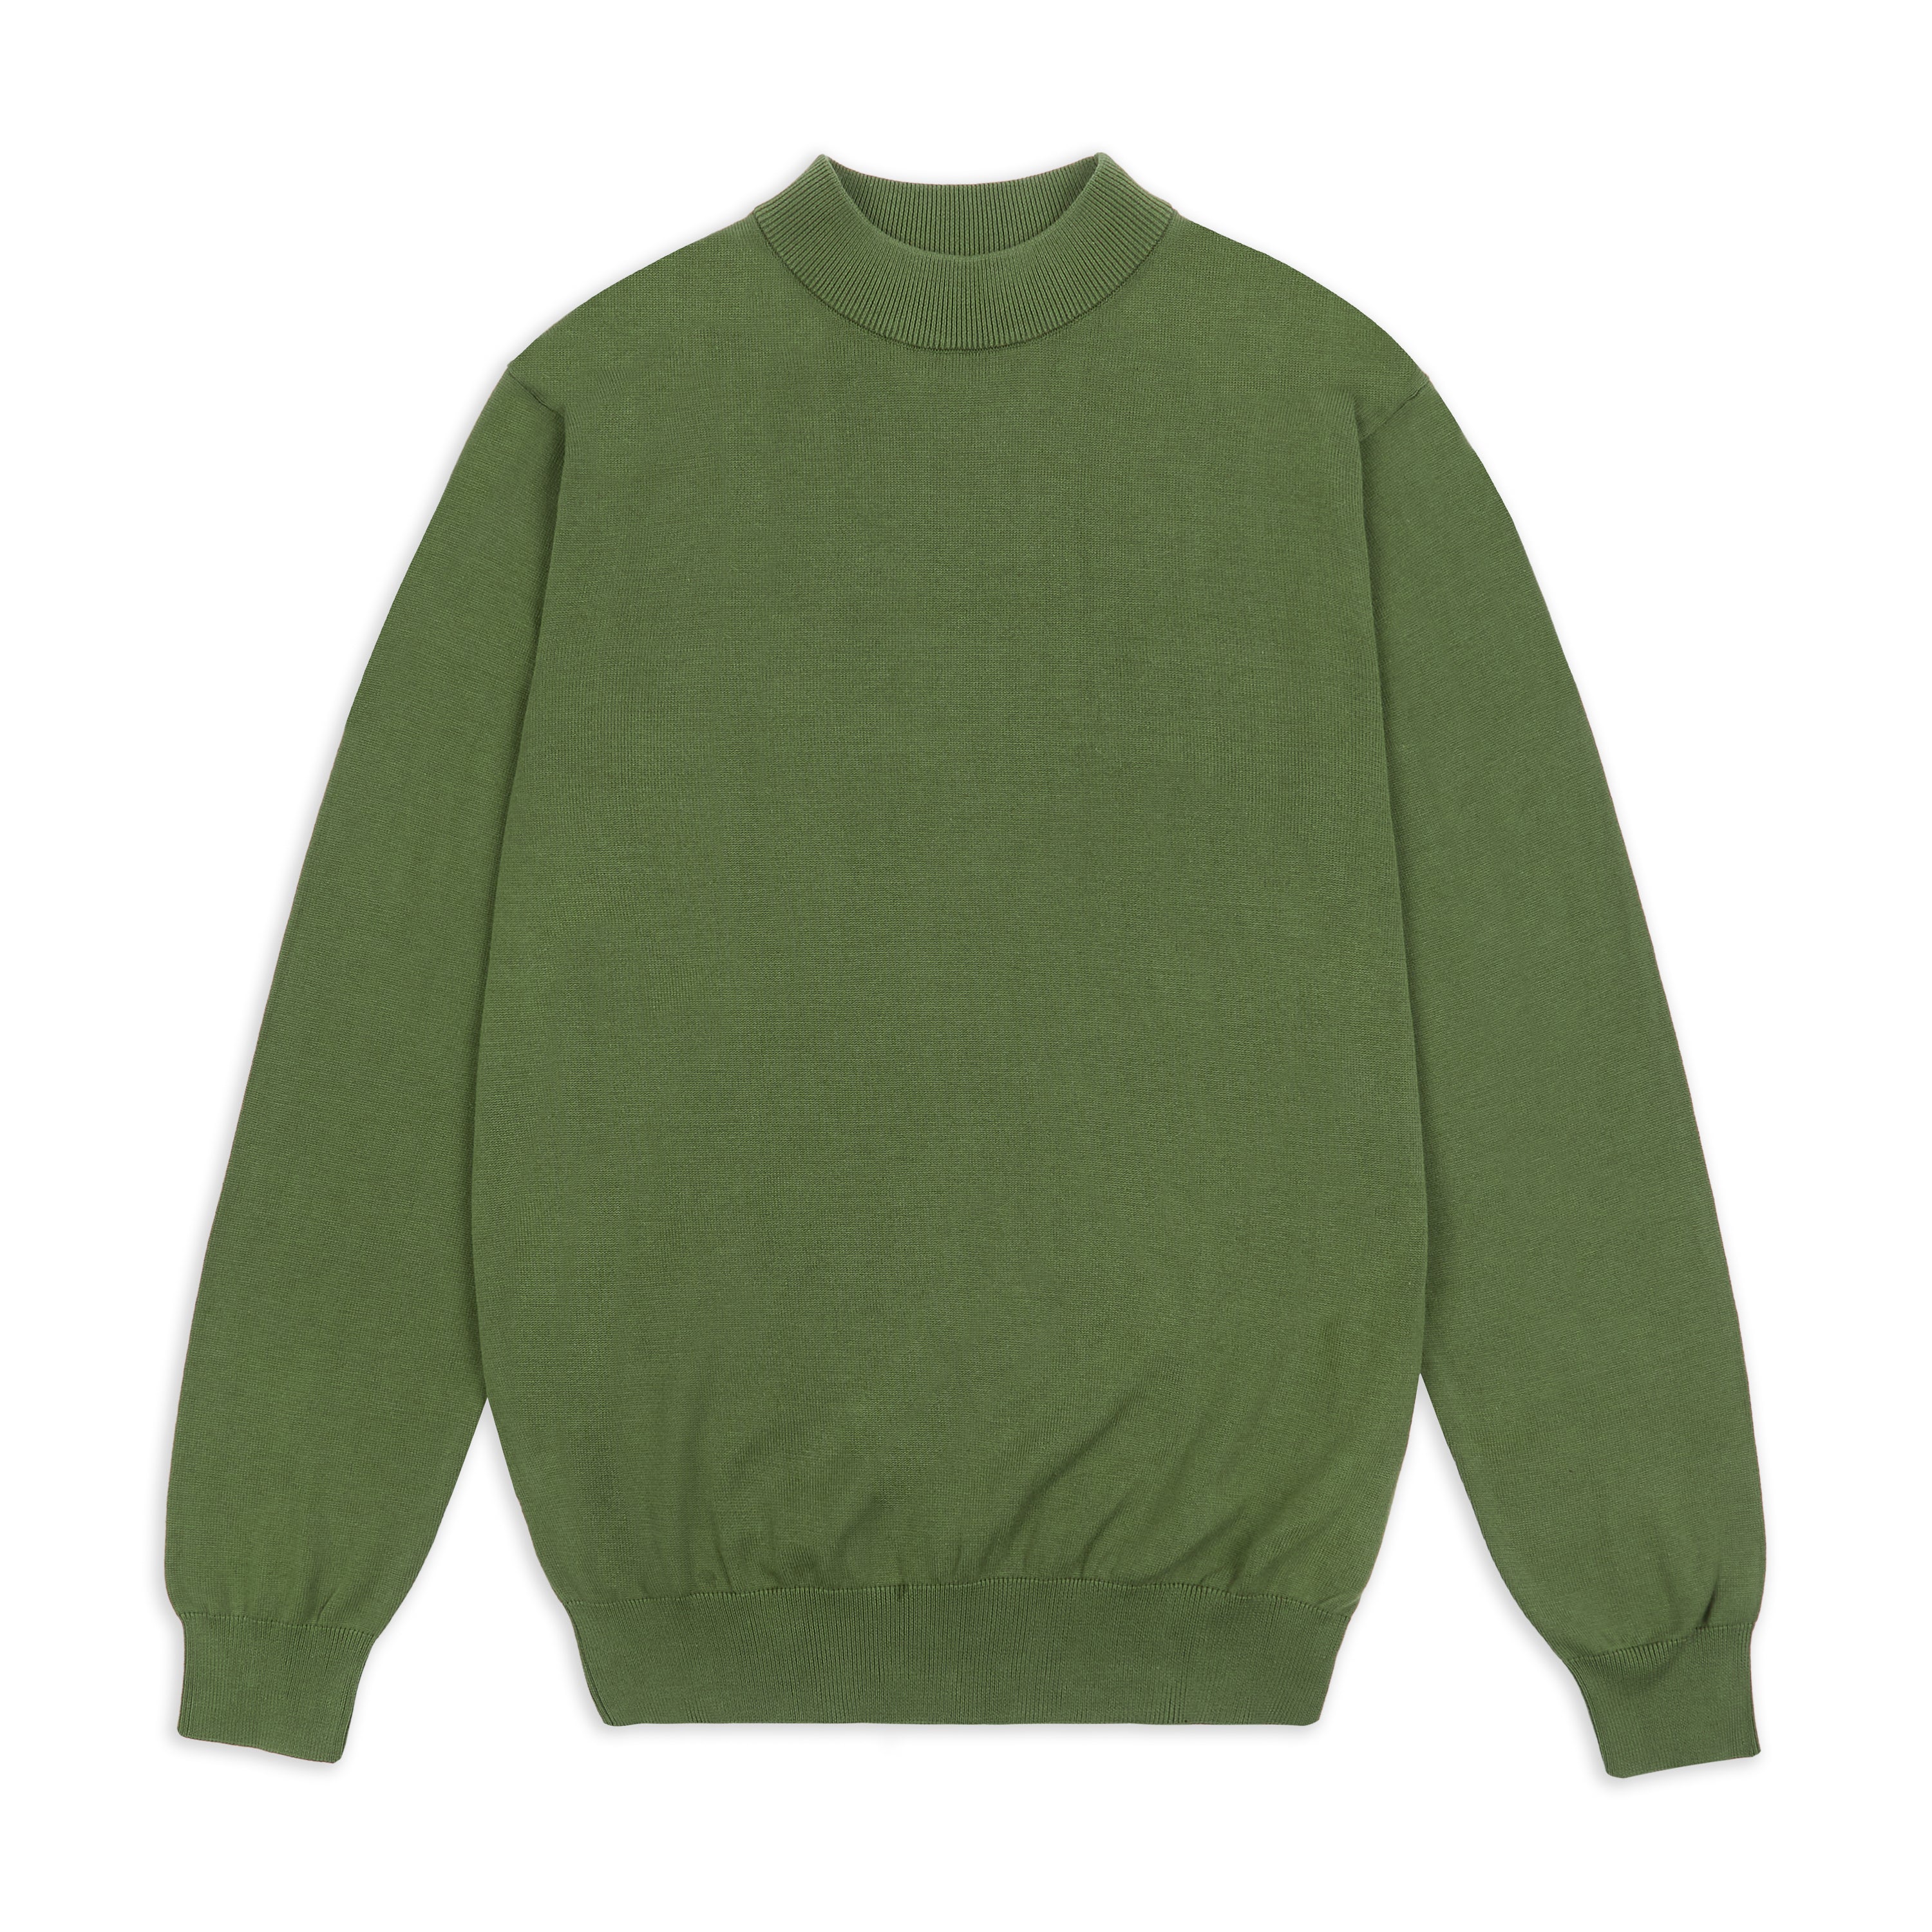 burrows-and-hare-mock-turtle-neck-light-green